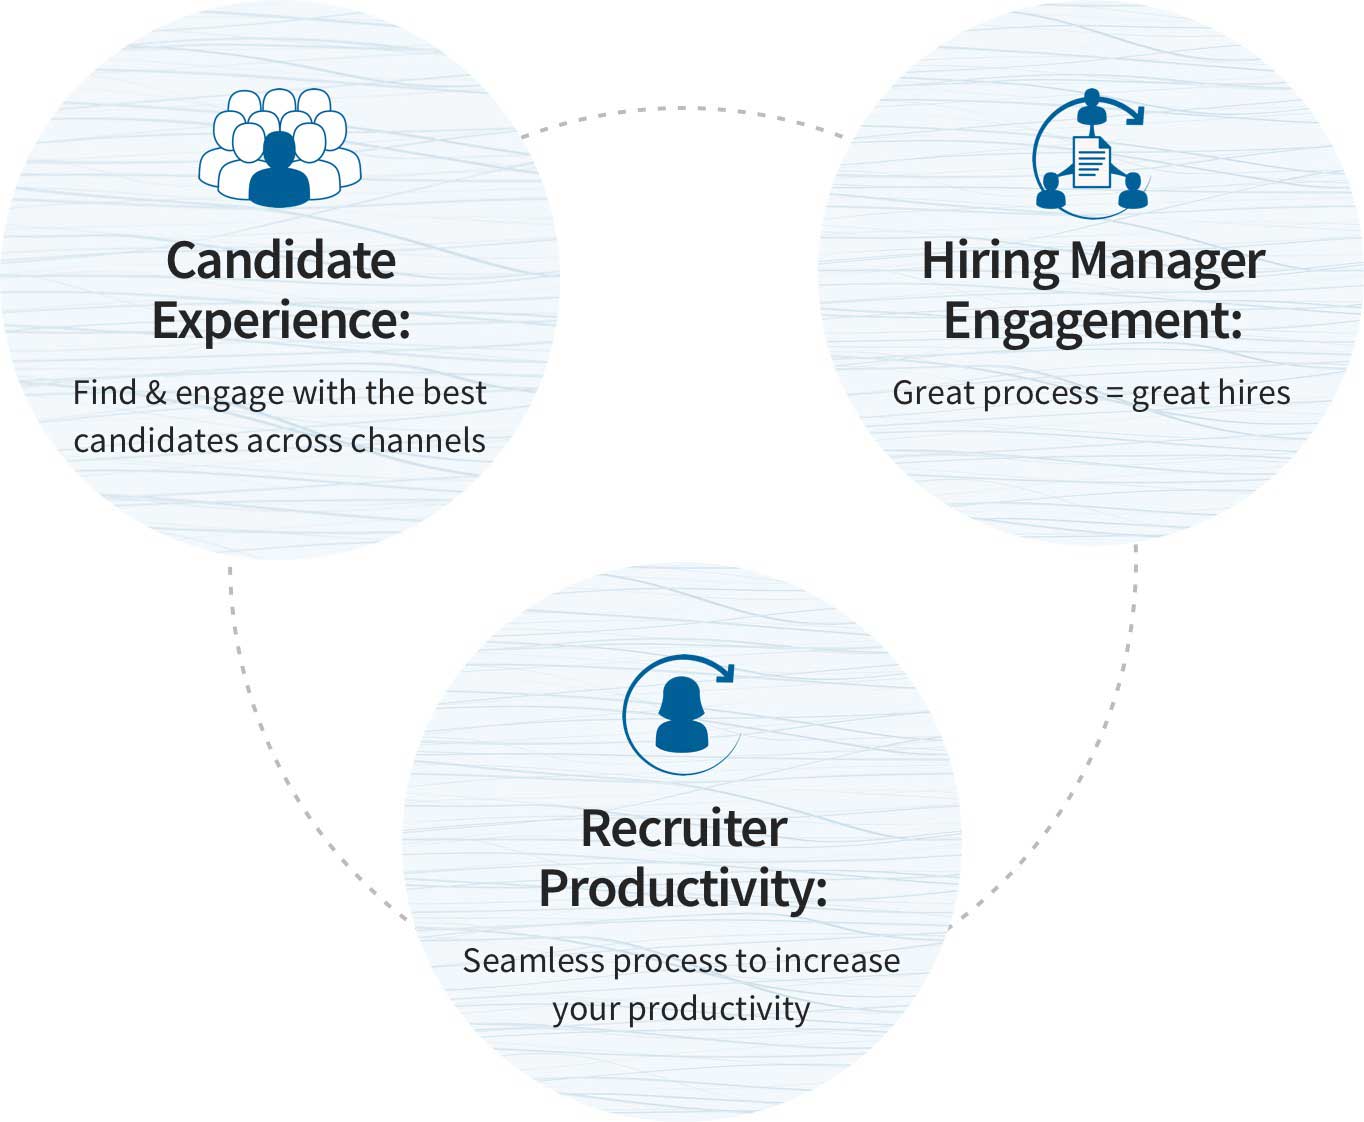 A Team of Highly Productive Recruiters